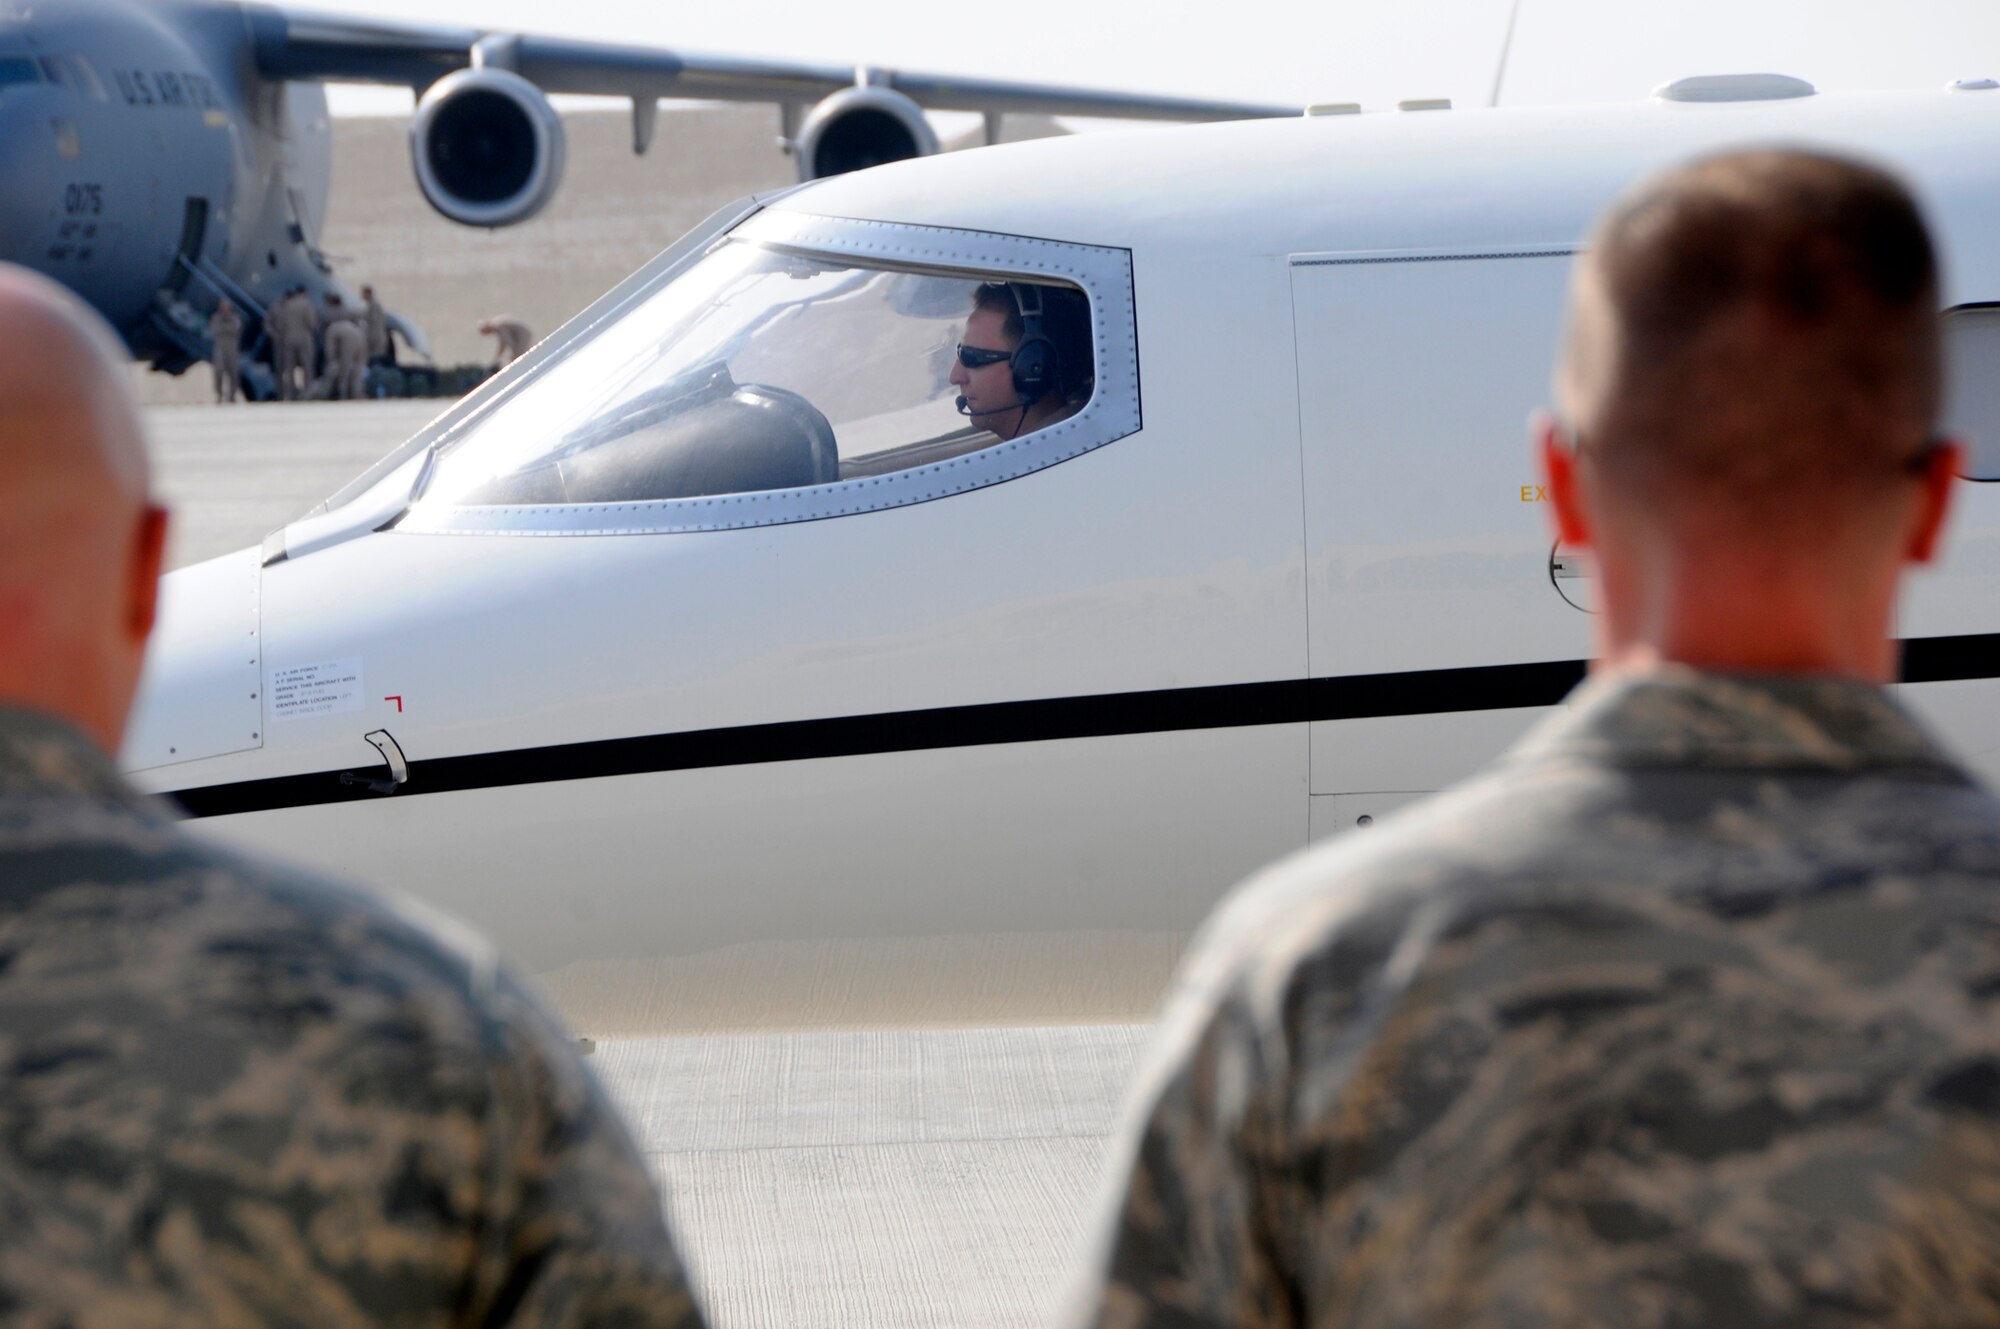 Capt. Kaaba Kraner, C-21 pilot assigned to the 379th Expeditionary Operations Group, prepares to take off. The C-21 is a twin turbofan engine aircraft used for cargo and passenger airlift. In addition to providing cargo and passenger airlift, the aircraft is capable of transporting one litter or five ambulatory patients during aeromedical evacuations. Captain Kraner is deployed from Andrews Air Force Base, Md., in support Operations Iraqi and Enduring Freedom and Joint Task Force-Horn of Africa. (U.S. Air Force photo by Tech. Sgt. Michael Boquette/Released)